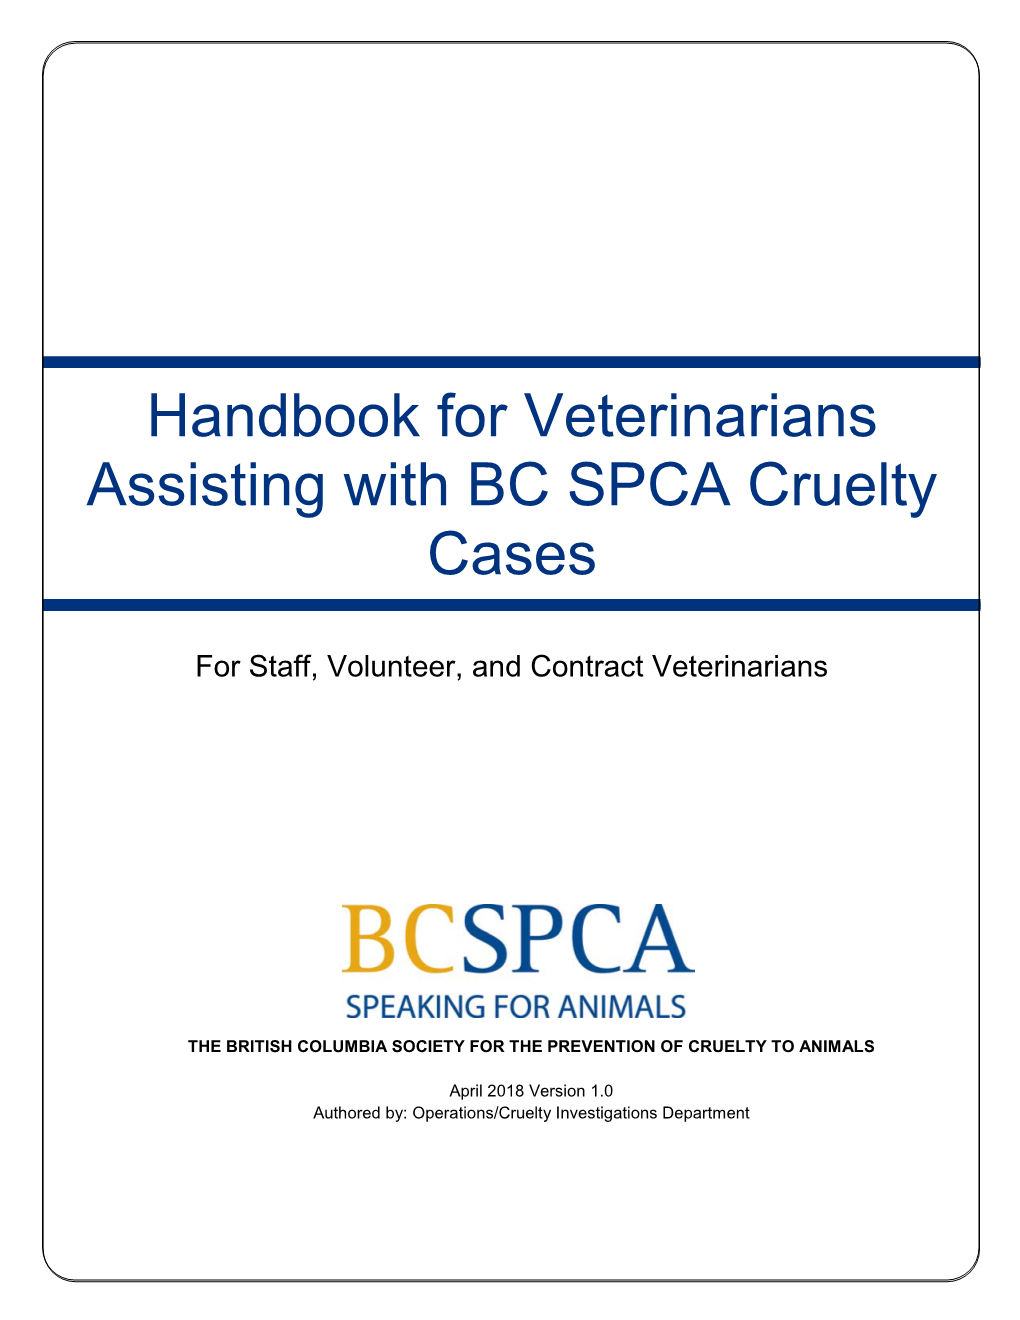 Handbook for Veterinarians Assisting with BC SPCA Cruelty Cases